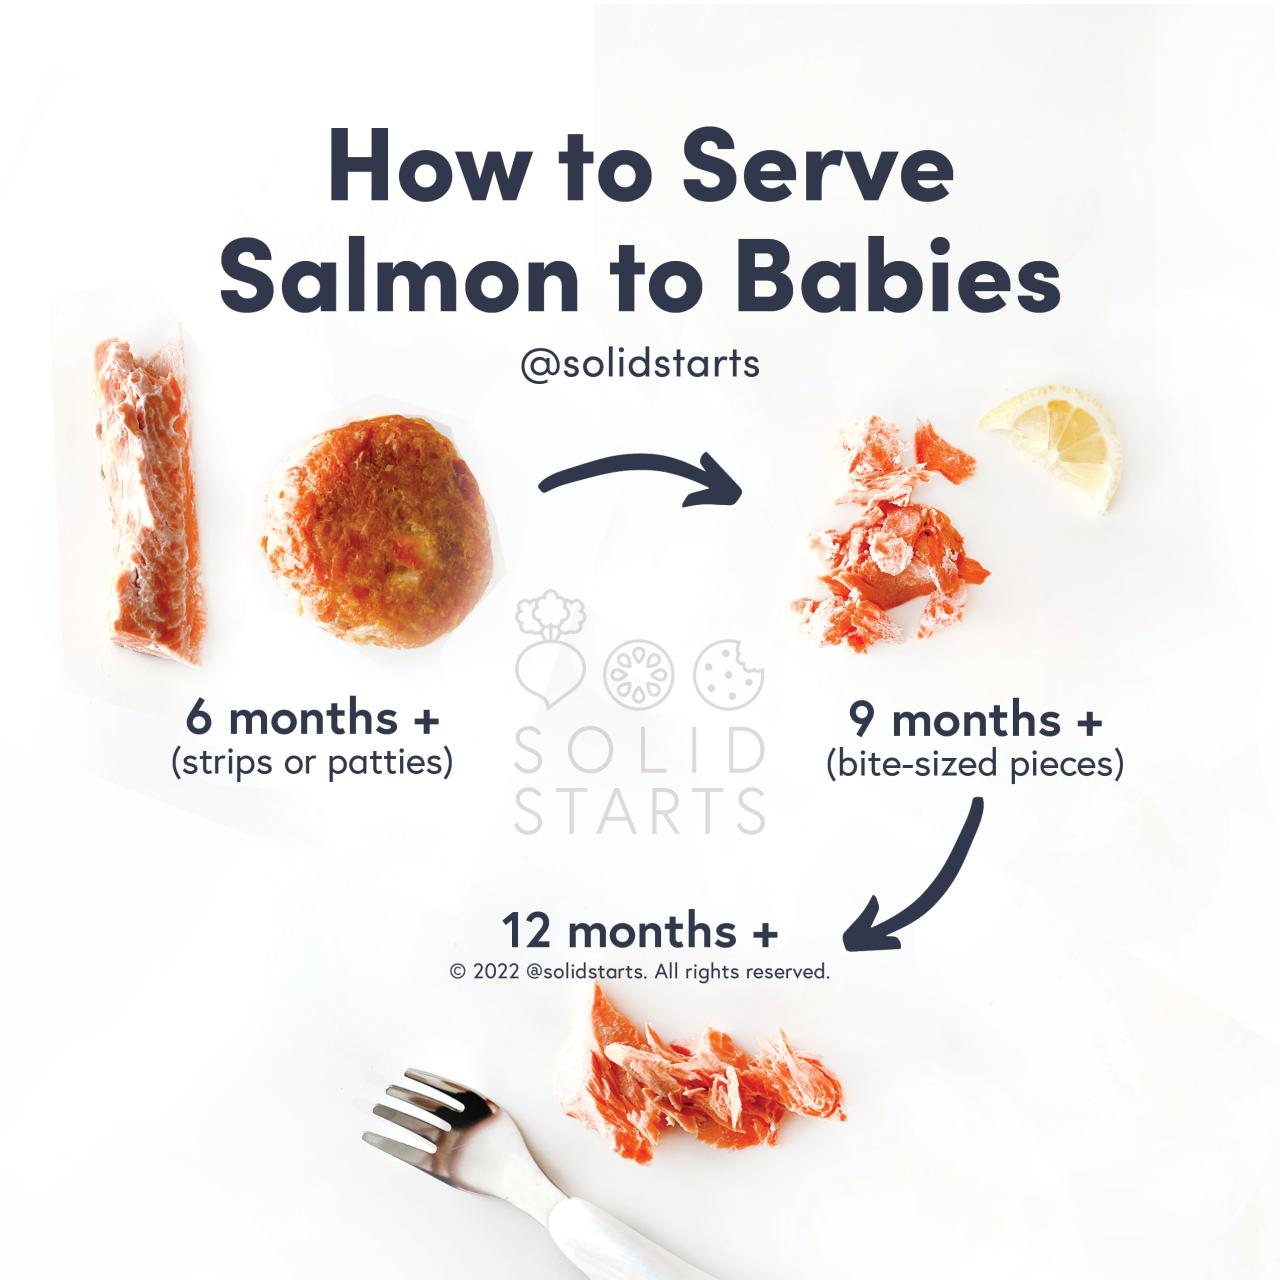 Salmon For Babies - When Can Babies Eat Salmon? - Solid Starts